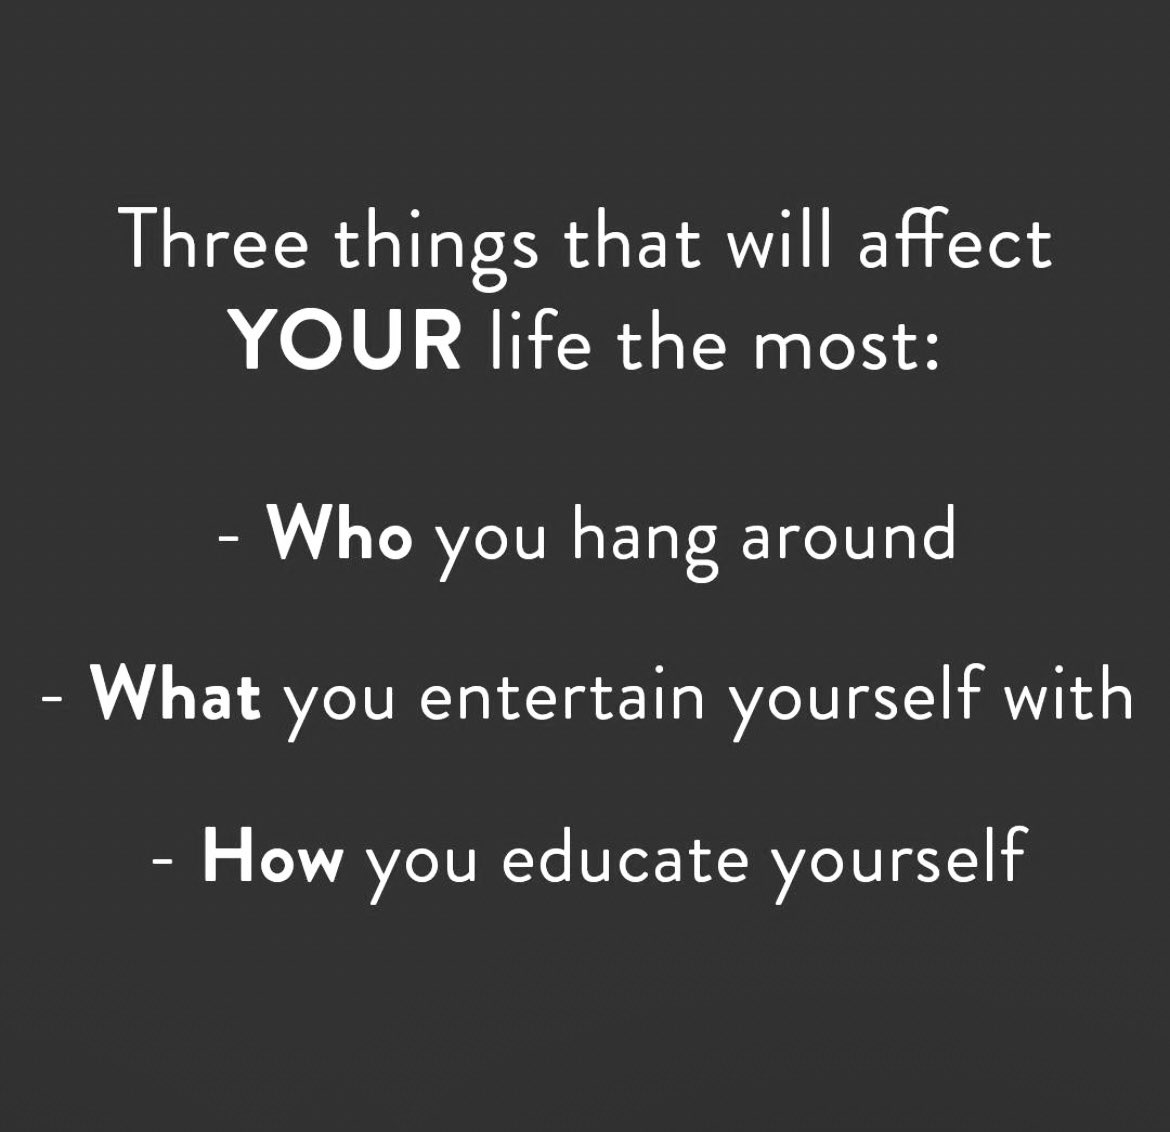 I decided yrs ago to be a “lifetime” learner, to live a life of significance. I read, watch vids, attend camps, talk to others. I like a good movie but I limit my entertainment. Who I ‘hang’ around is extremely important to me. My inner circle matters. Food for thought today. 👀